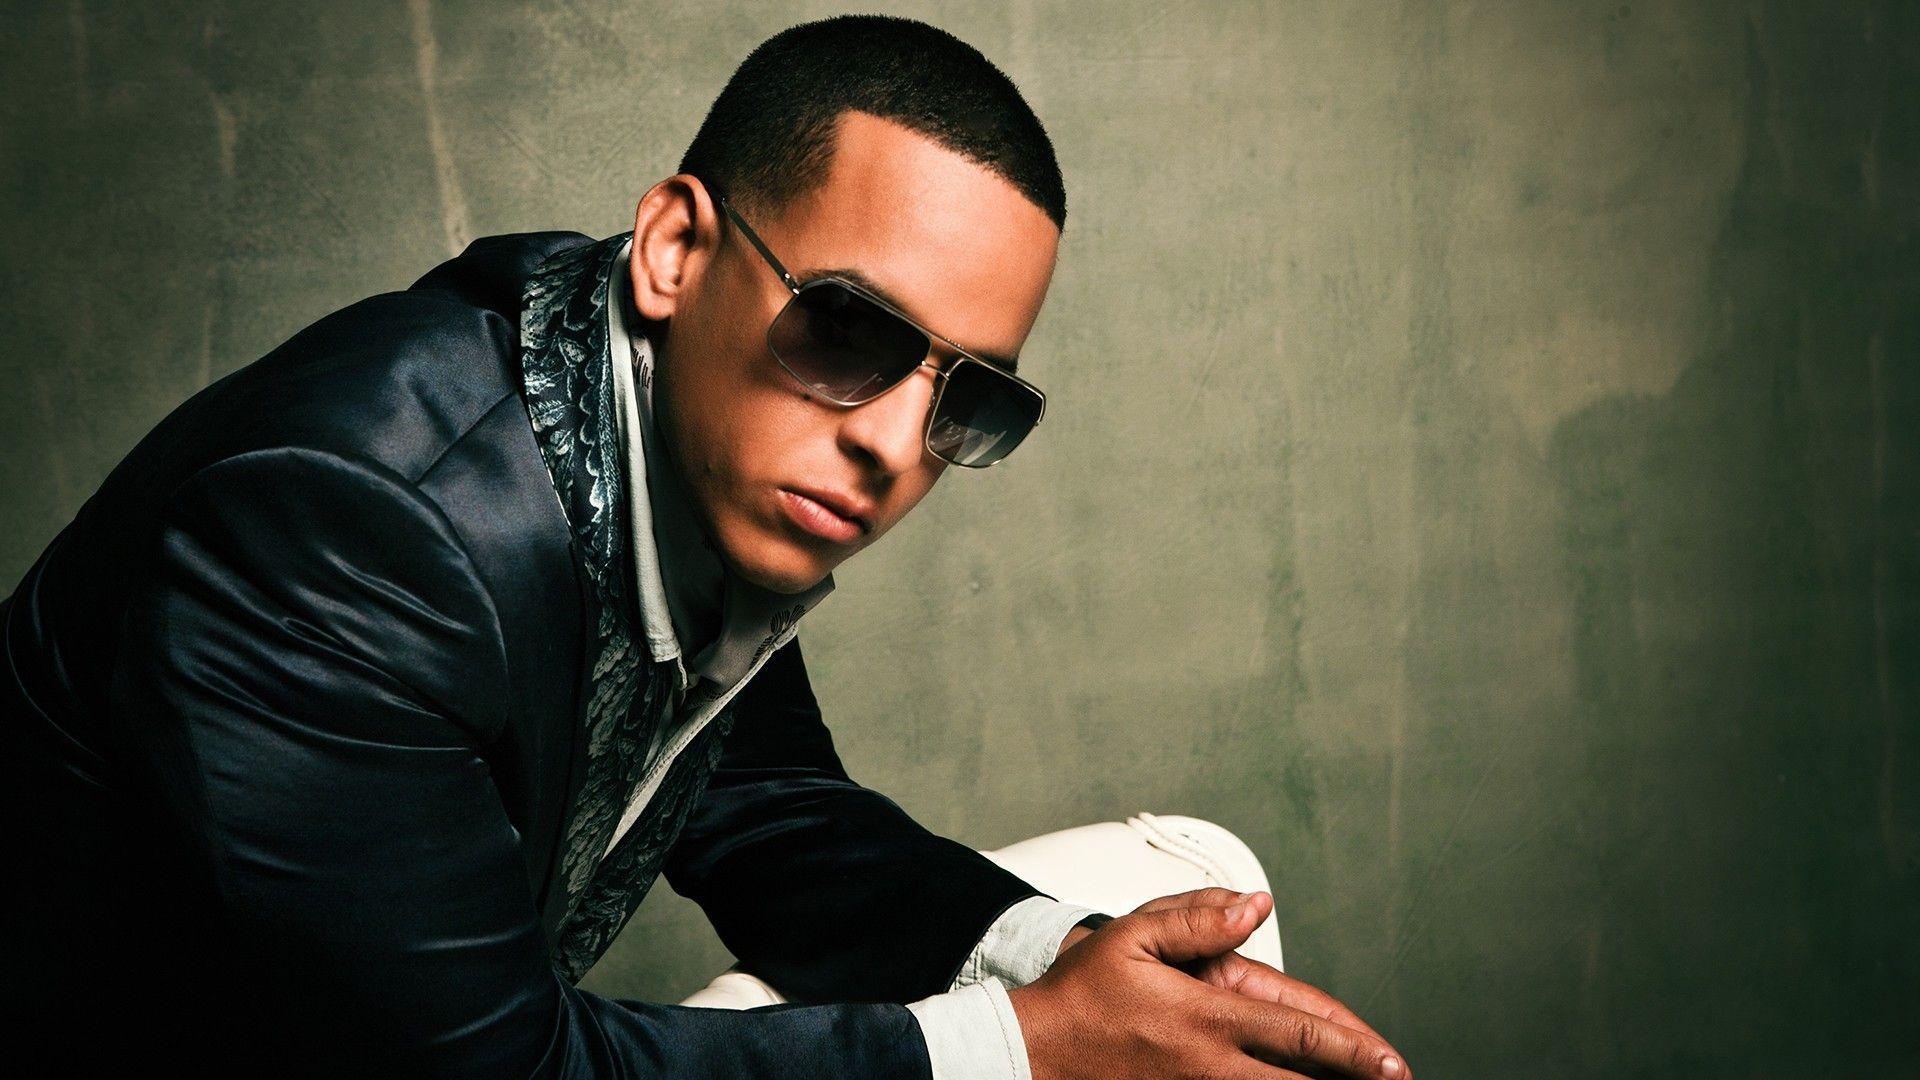 Reggaeton Music: Daddy Yankee, A form of dance music characterized by a fusion of Latin rhythms, dancehall, and hip-hop. 1920x1080 Full HD Background.